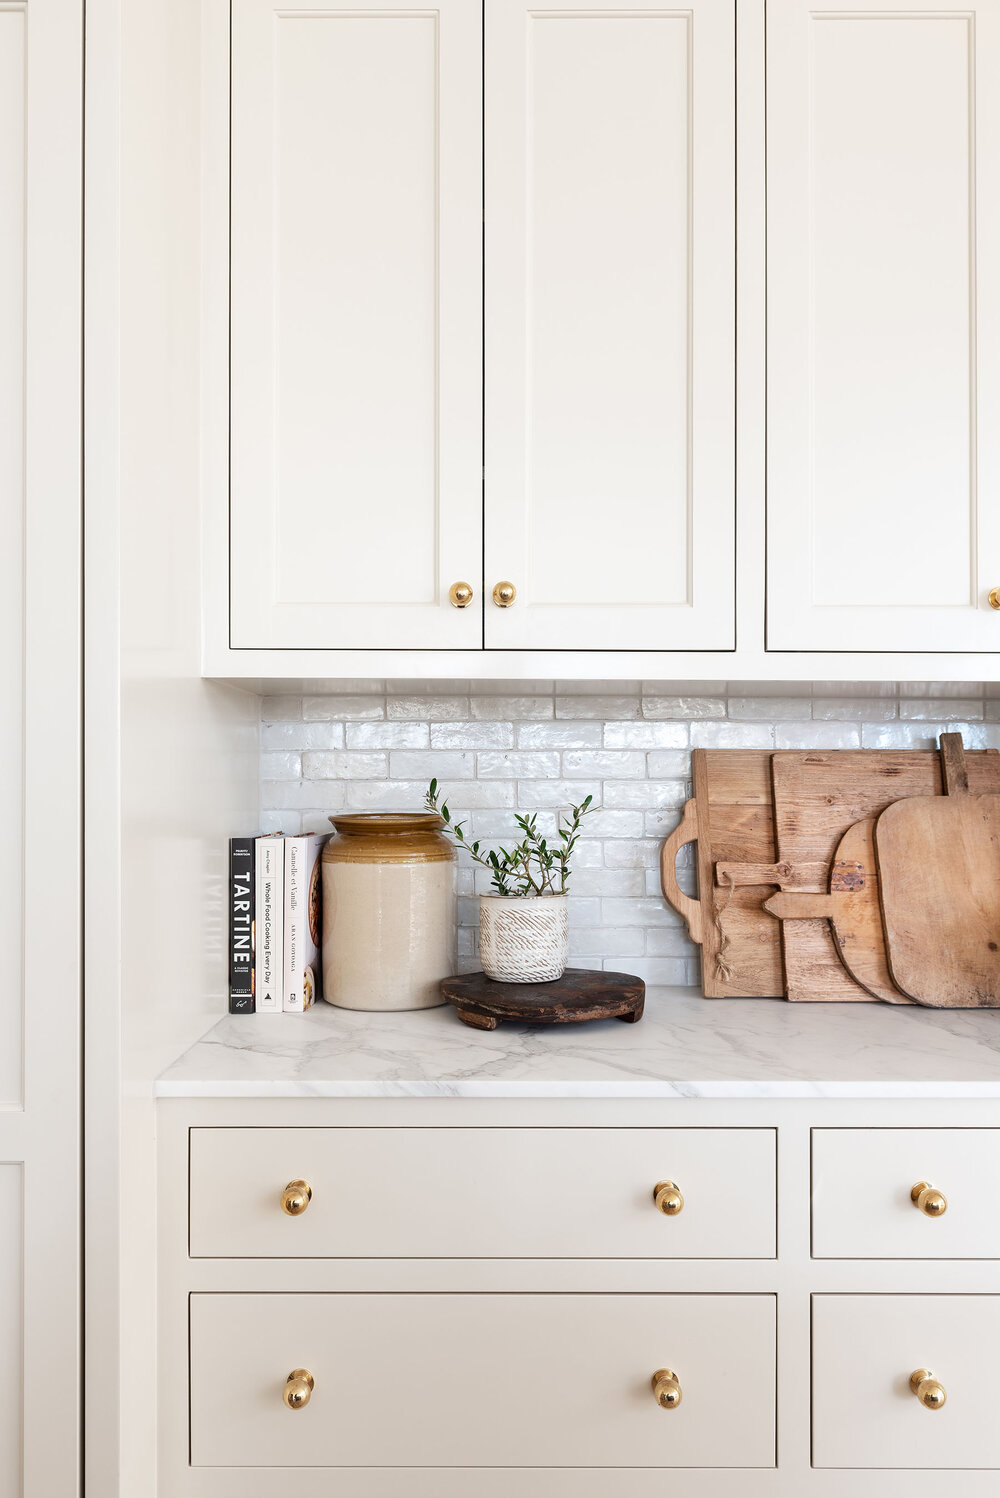 Clé’s     Weathered White Zellige Tile    in    The McGee Home Kitchen.